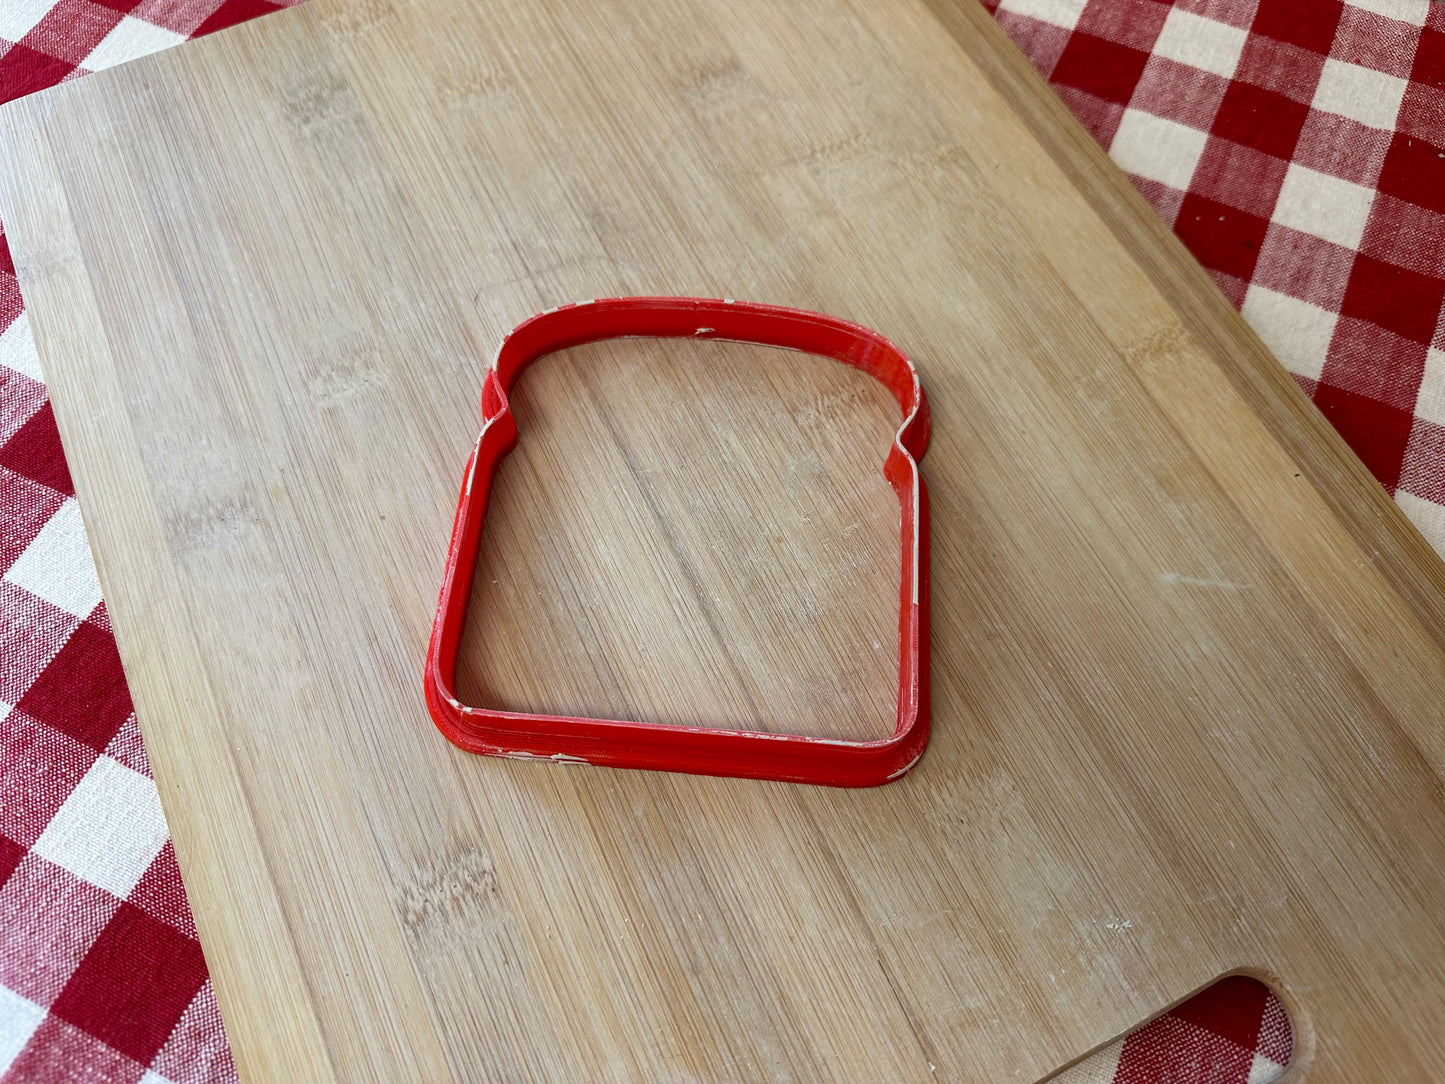 Toast, Bread Slice shaped Clay Cutter, sandwich plate - Plastic 3D printed, pottery tool,  choose size